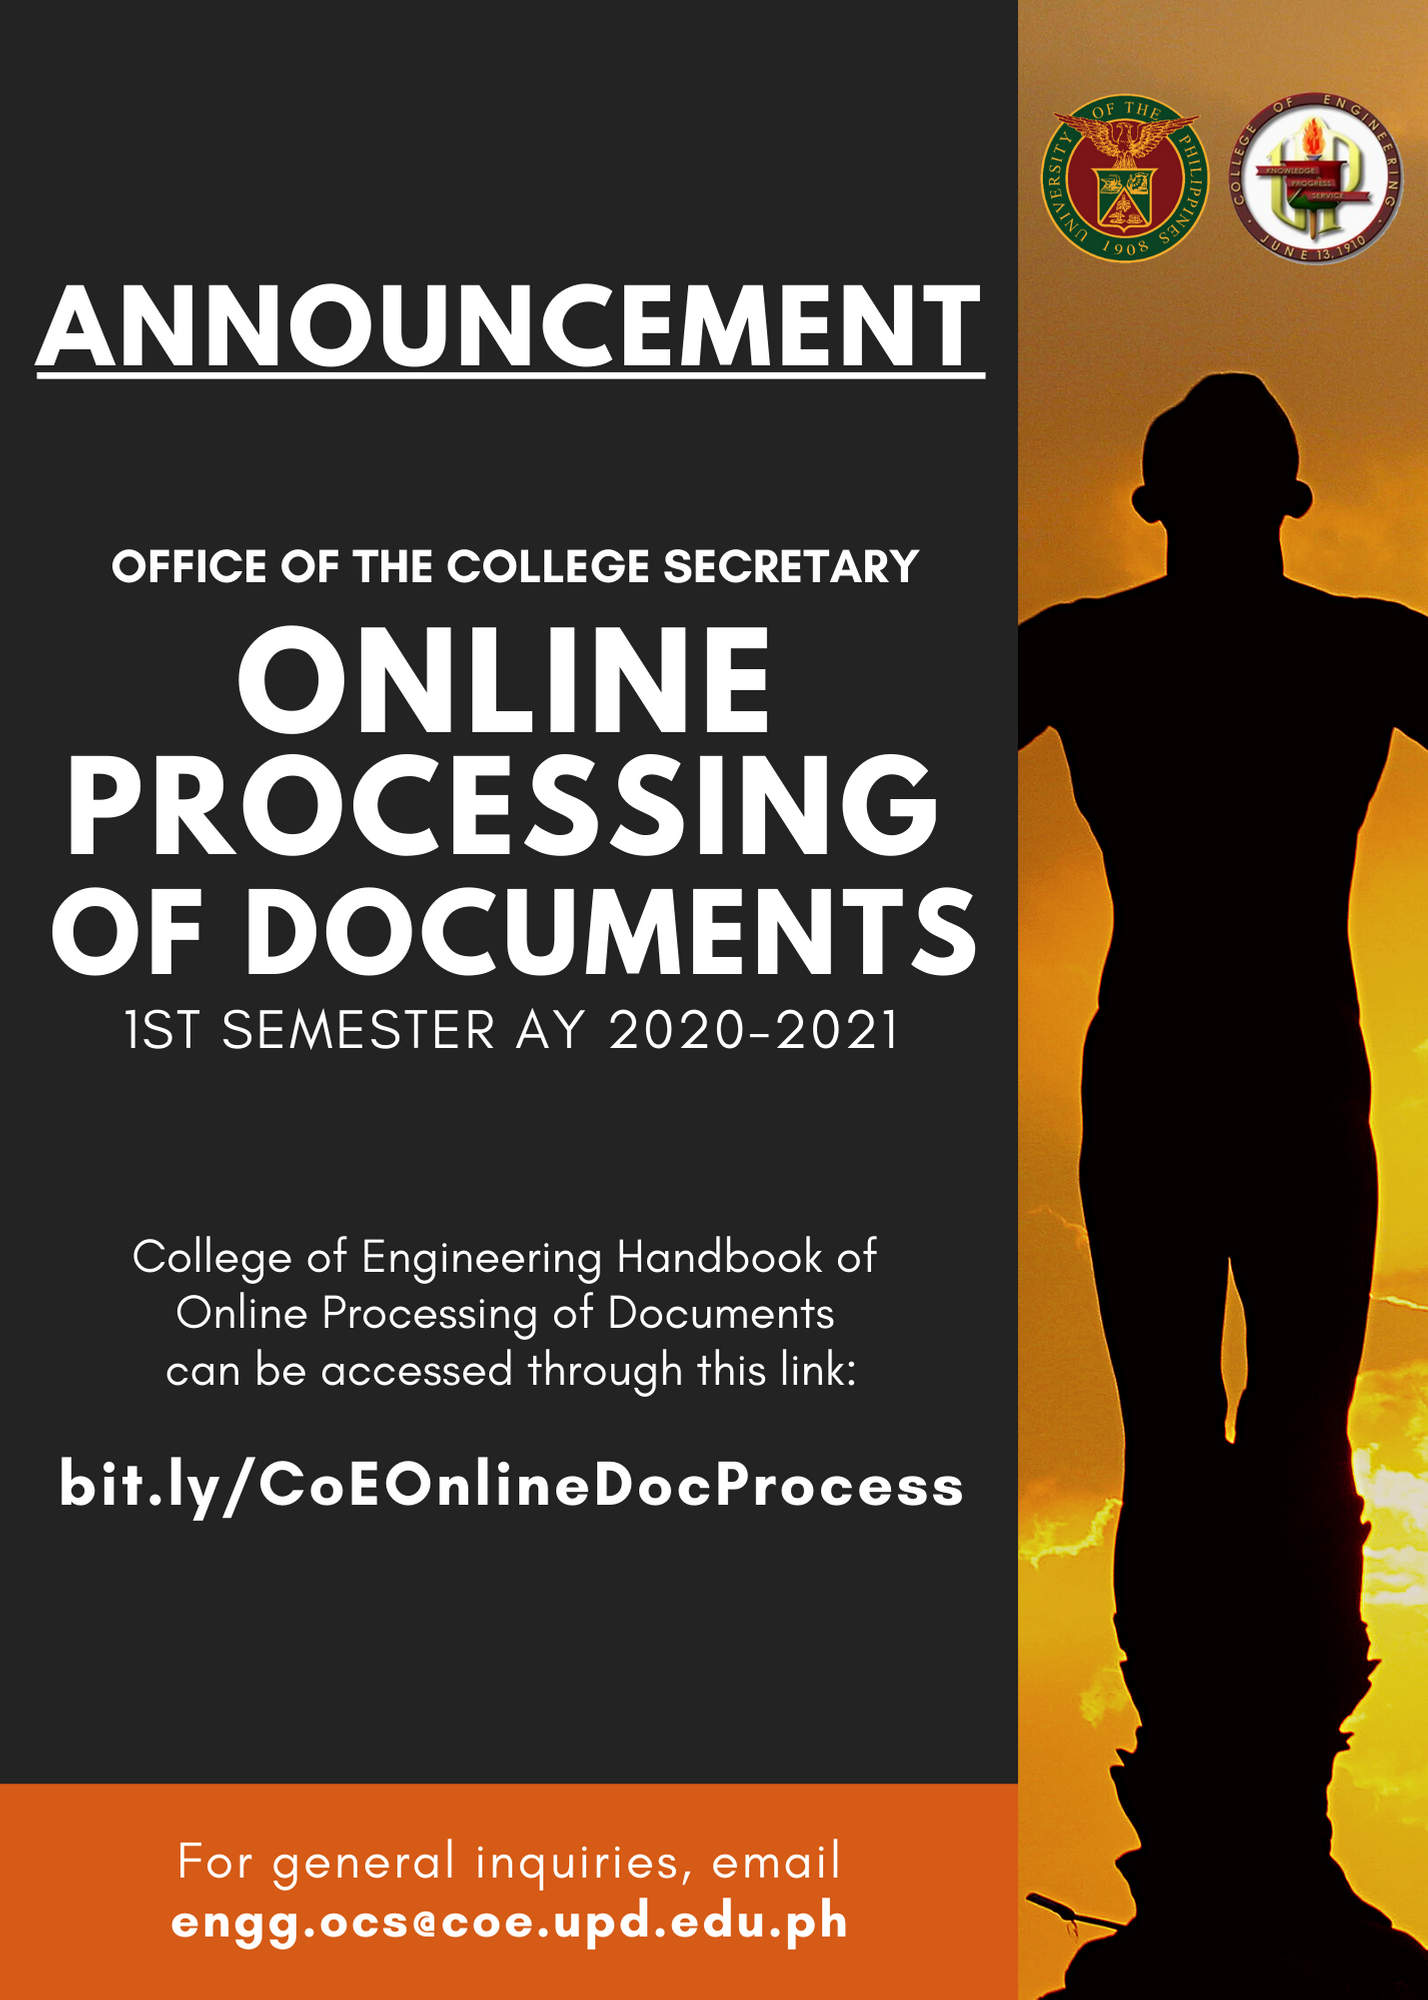 Online Processing of Documents – Office of the College Secretary